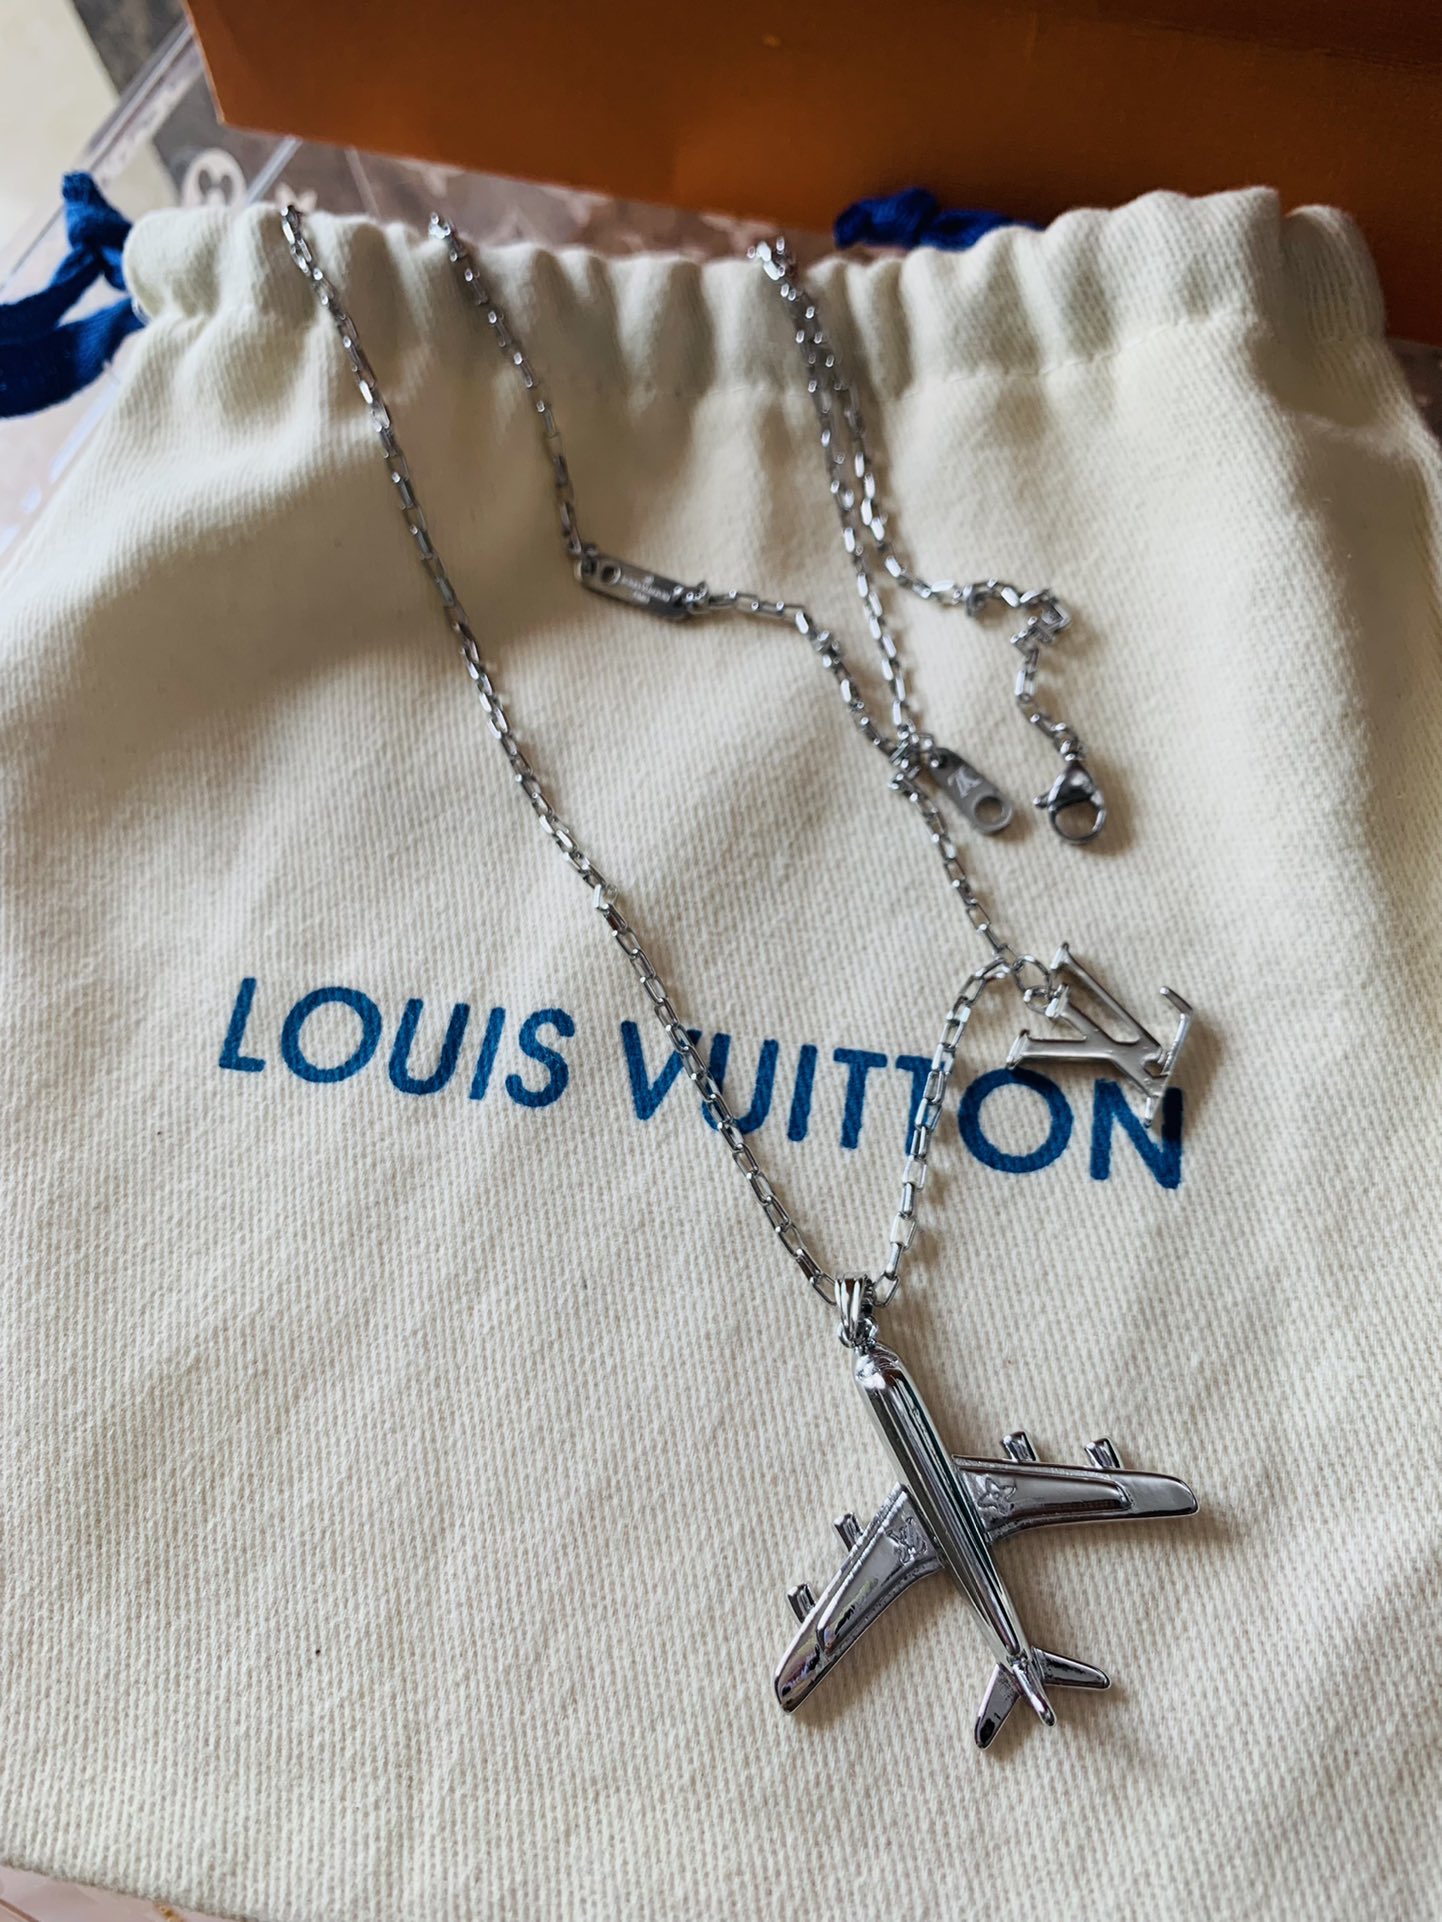 LV airplane necklace/chain from Survivalsource for 135¥ link under image.  Detailed review in the comments : r/DesignerReps